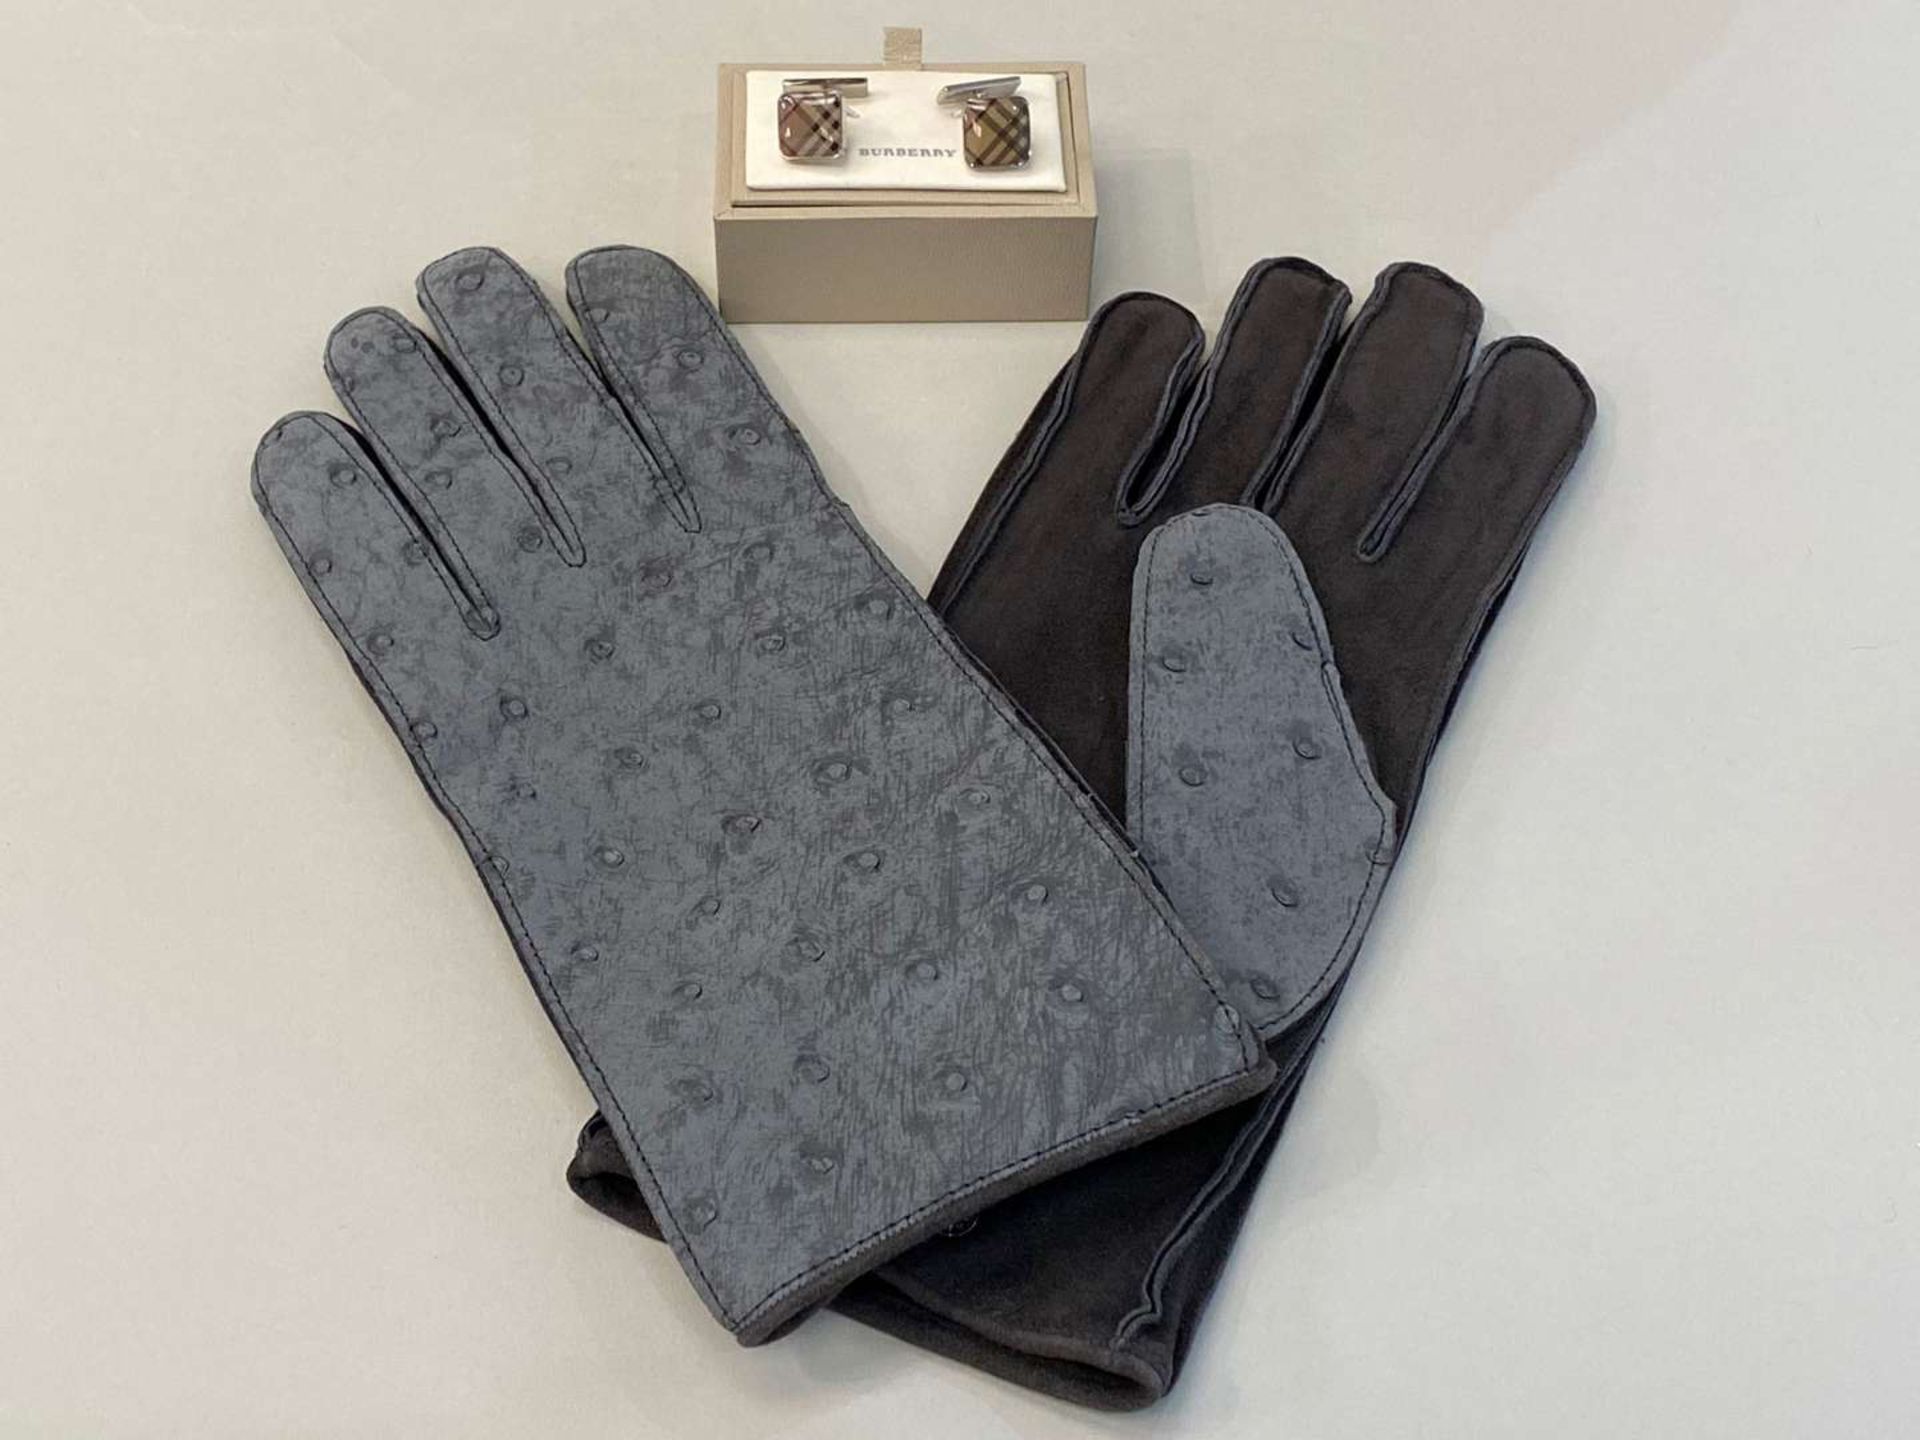 BURBERRY, men's Ostrich, kidskin & cashmere lined gloves, together with a pair of Burberry cufflinks